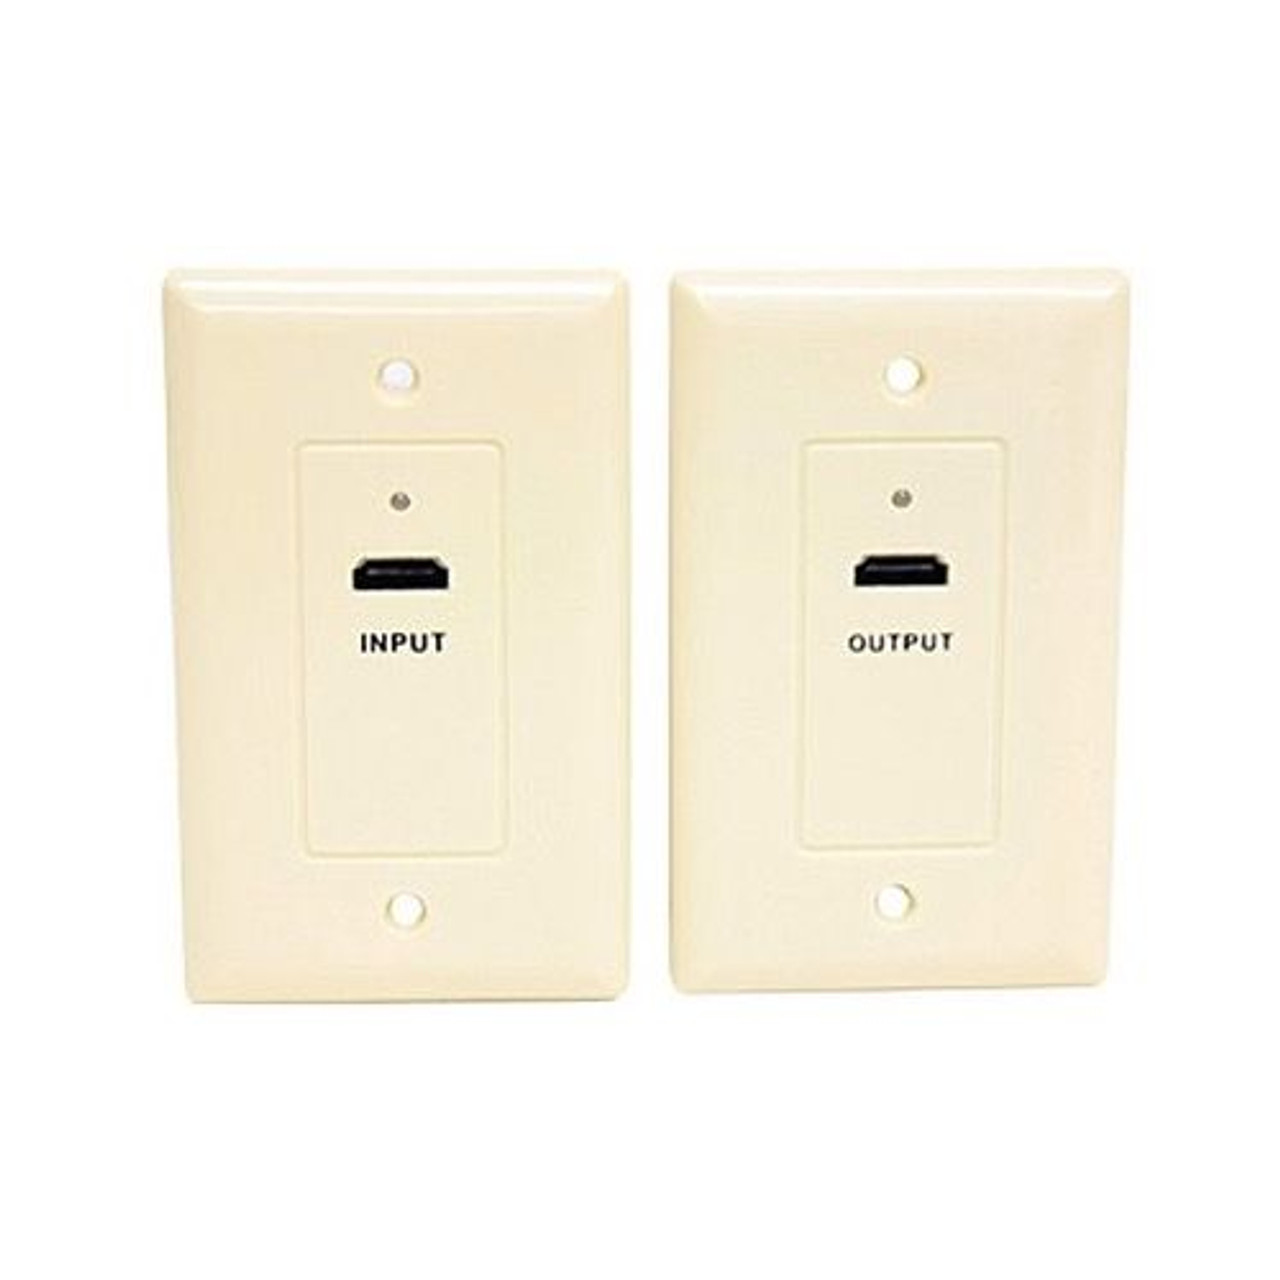 Eagle HDMI Over Cat5e Wall Plate Ivory 1080p 1.3 HDTV Face Plate Pair 1 HDMI Input Plate and 1 HDMI Output Plate Signal Transfered Via CAT-5e Cable, High Definition Interface HDTV Applications